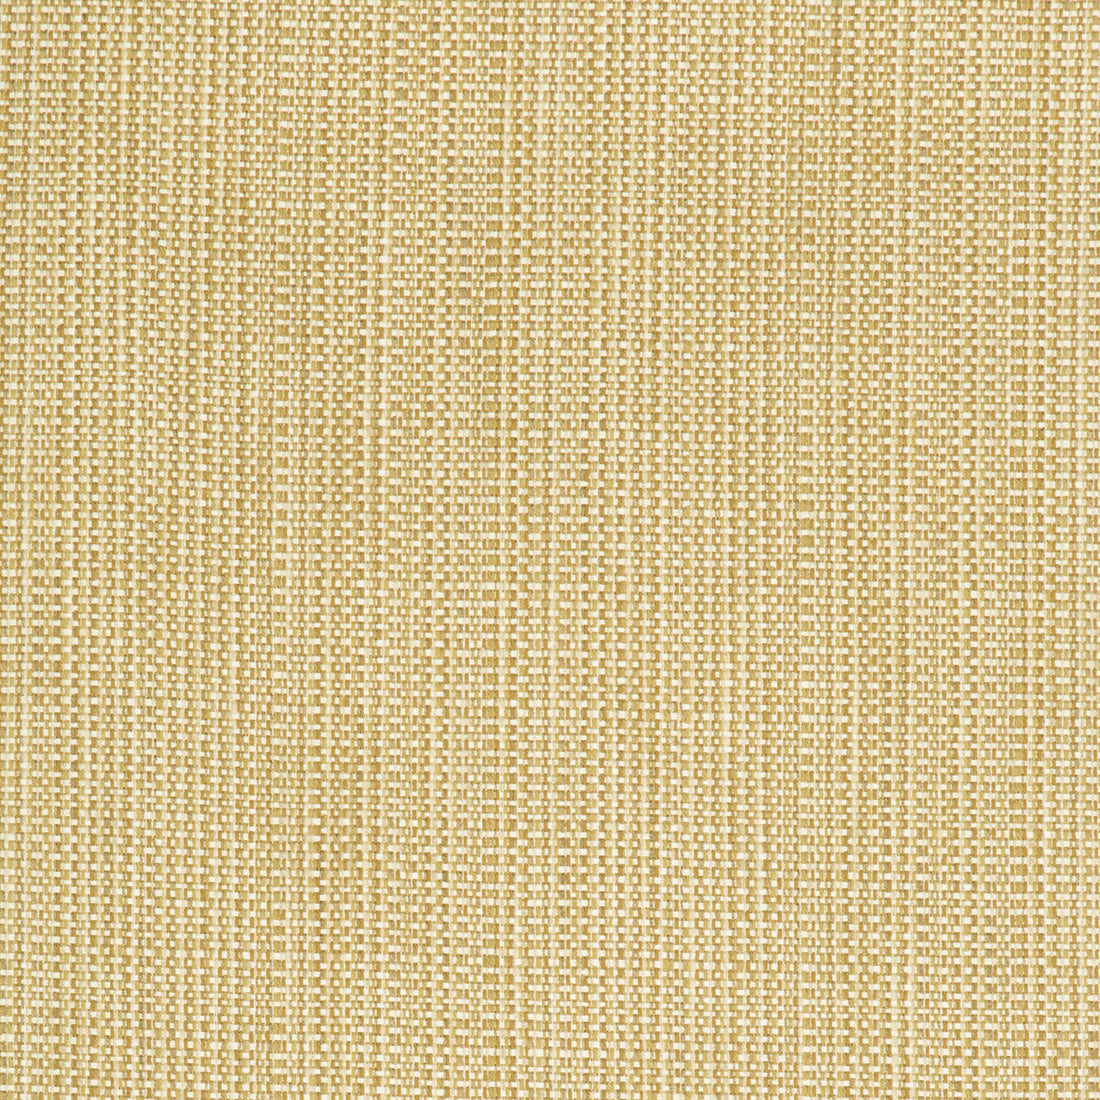 Kravet Smart fabric in 34627-416 color - pattern 34627.416.0 - by Kravet Smart in the Performance Crypton Home collection